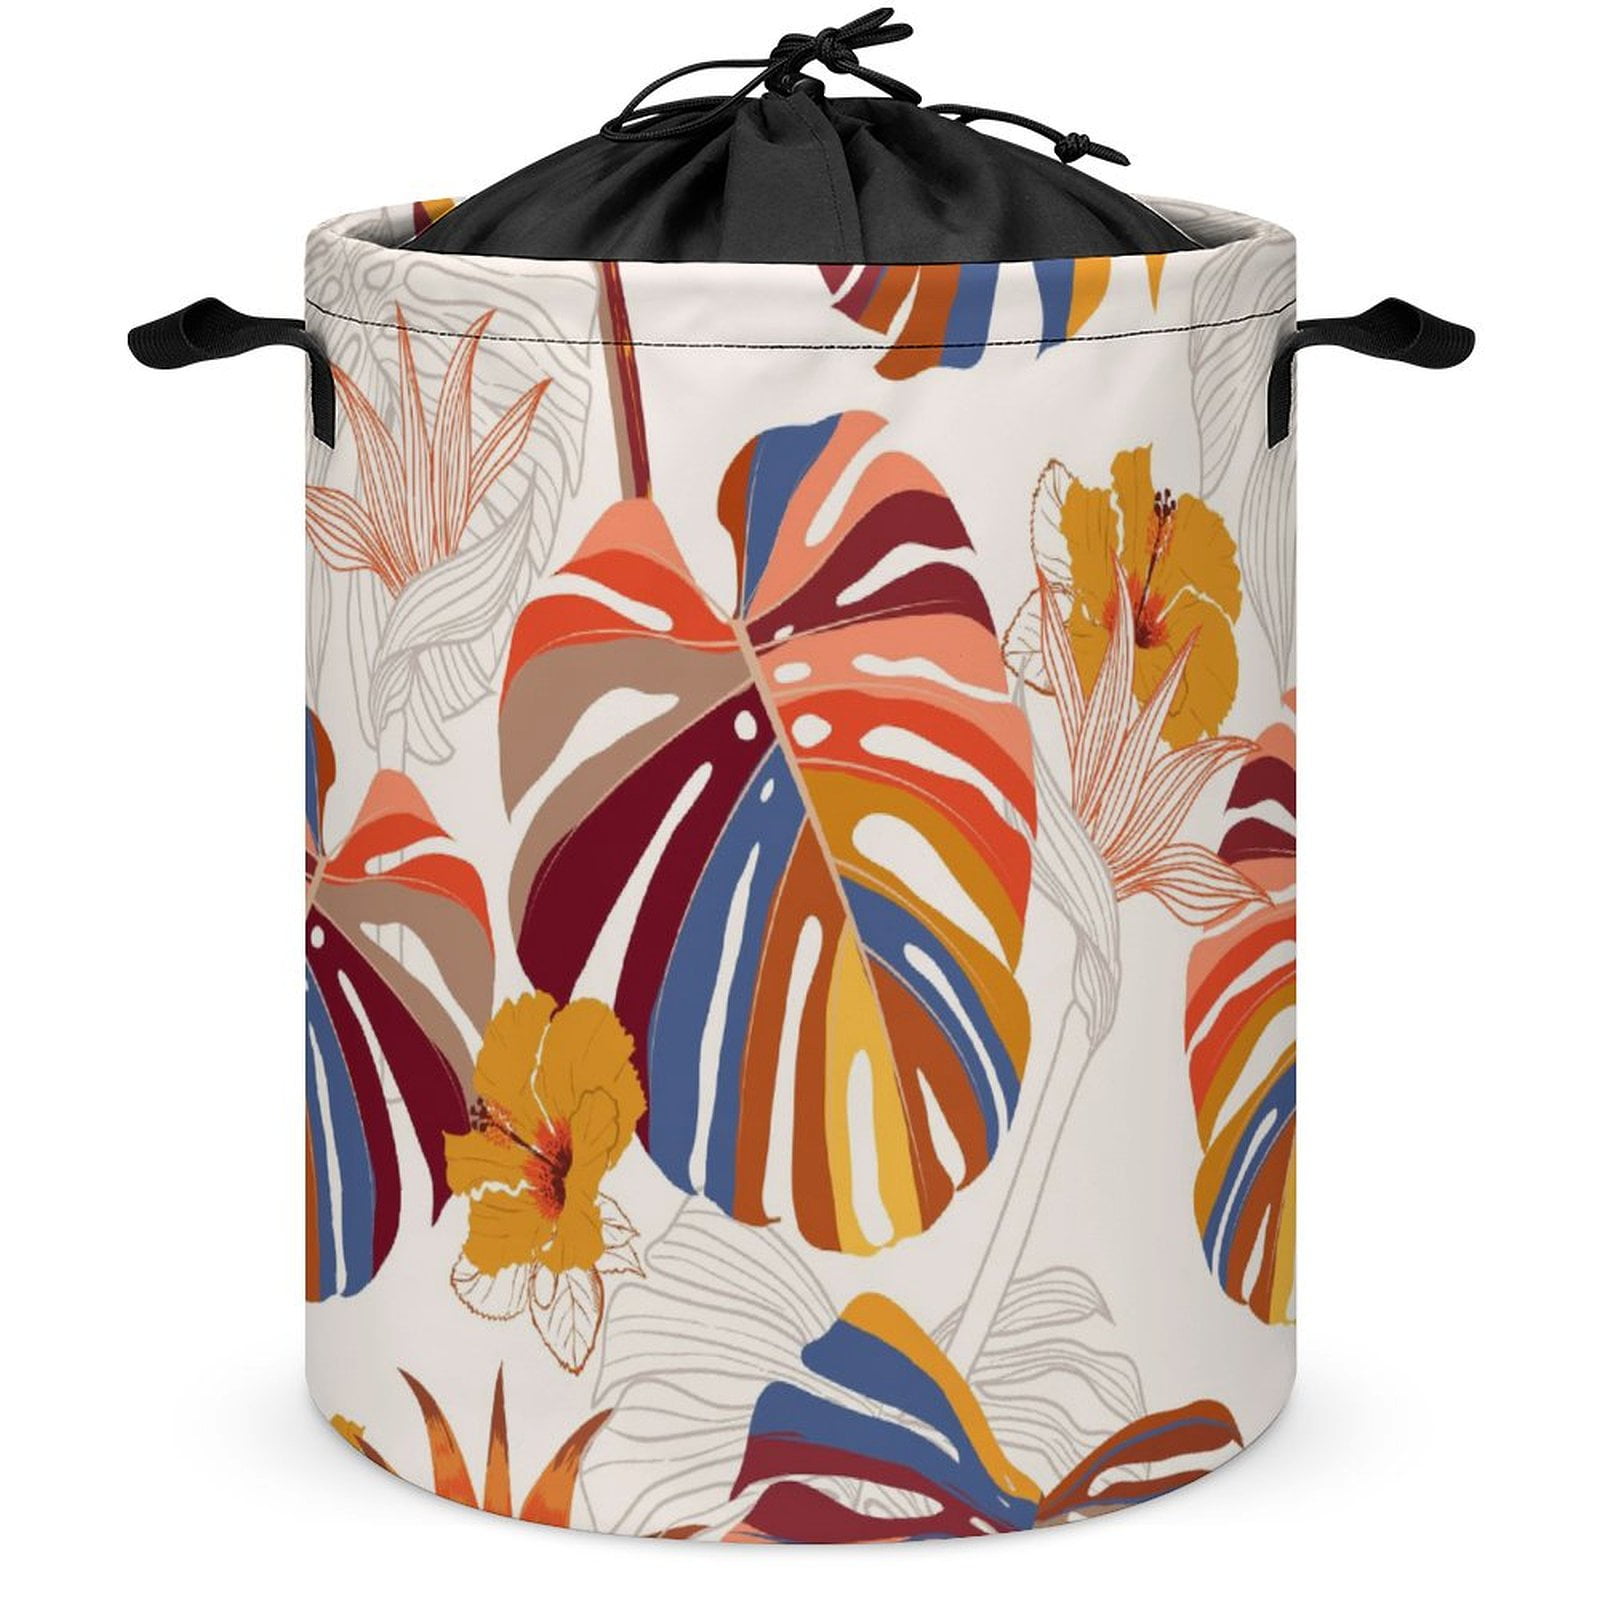 LAKIMCT Tropical Palm Leaf Drawstring Laundry Basket with Handle, 42L ...